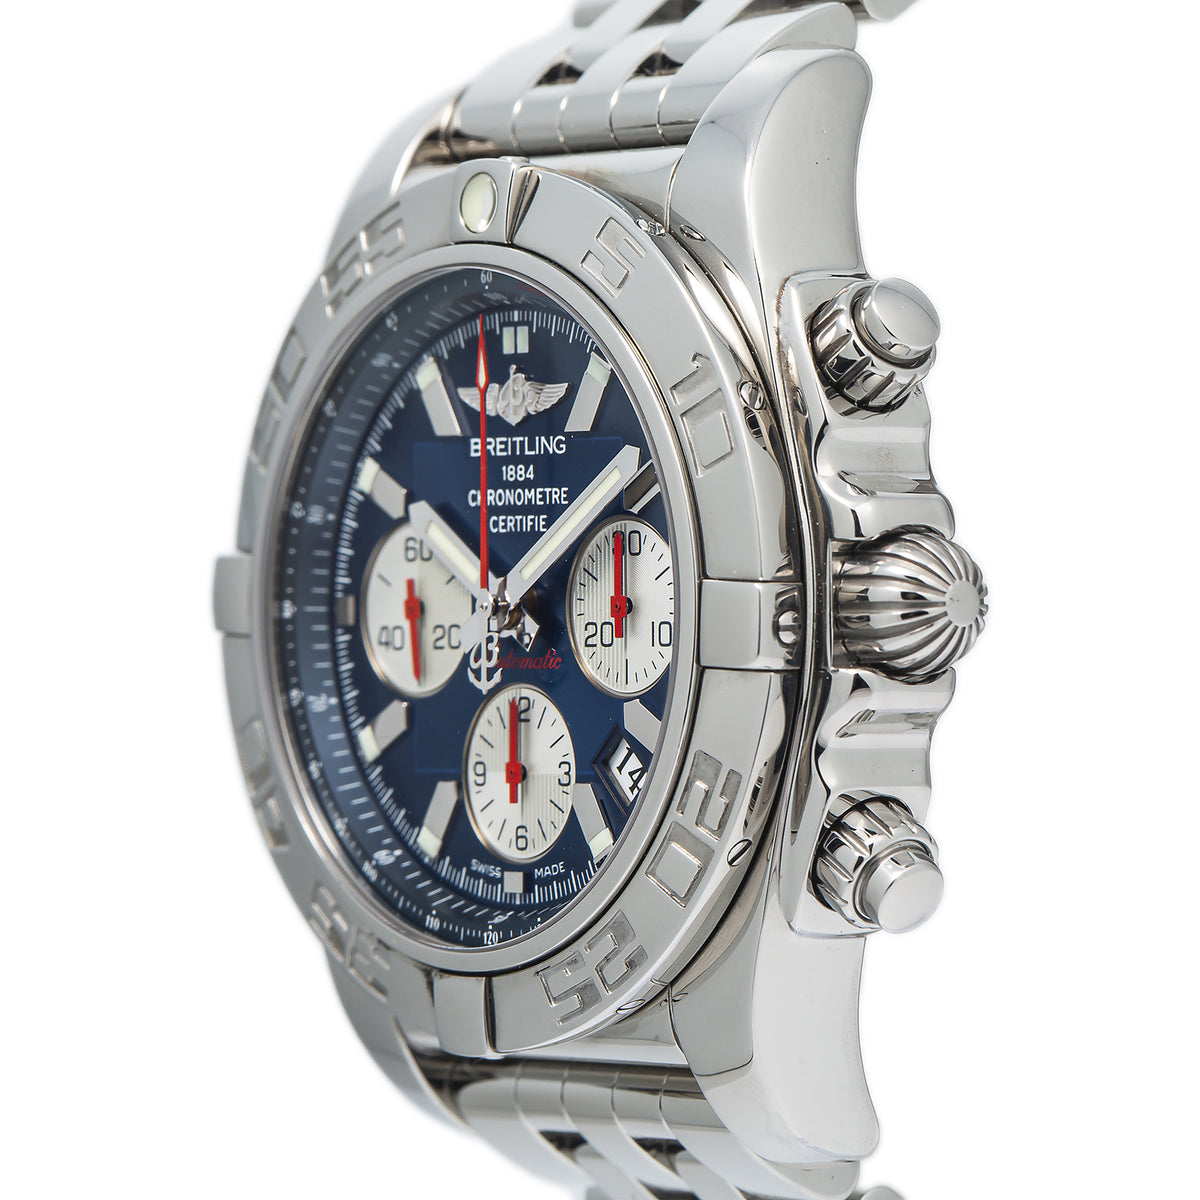 Breitling Chronomat 44 AB0110 United We Stand Limited Edition Men's Watch 44mm